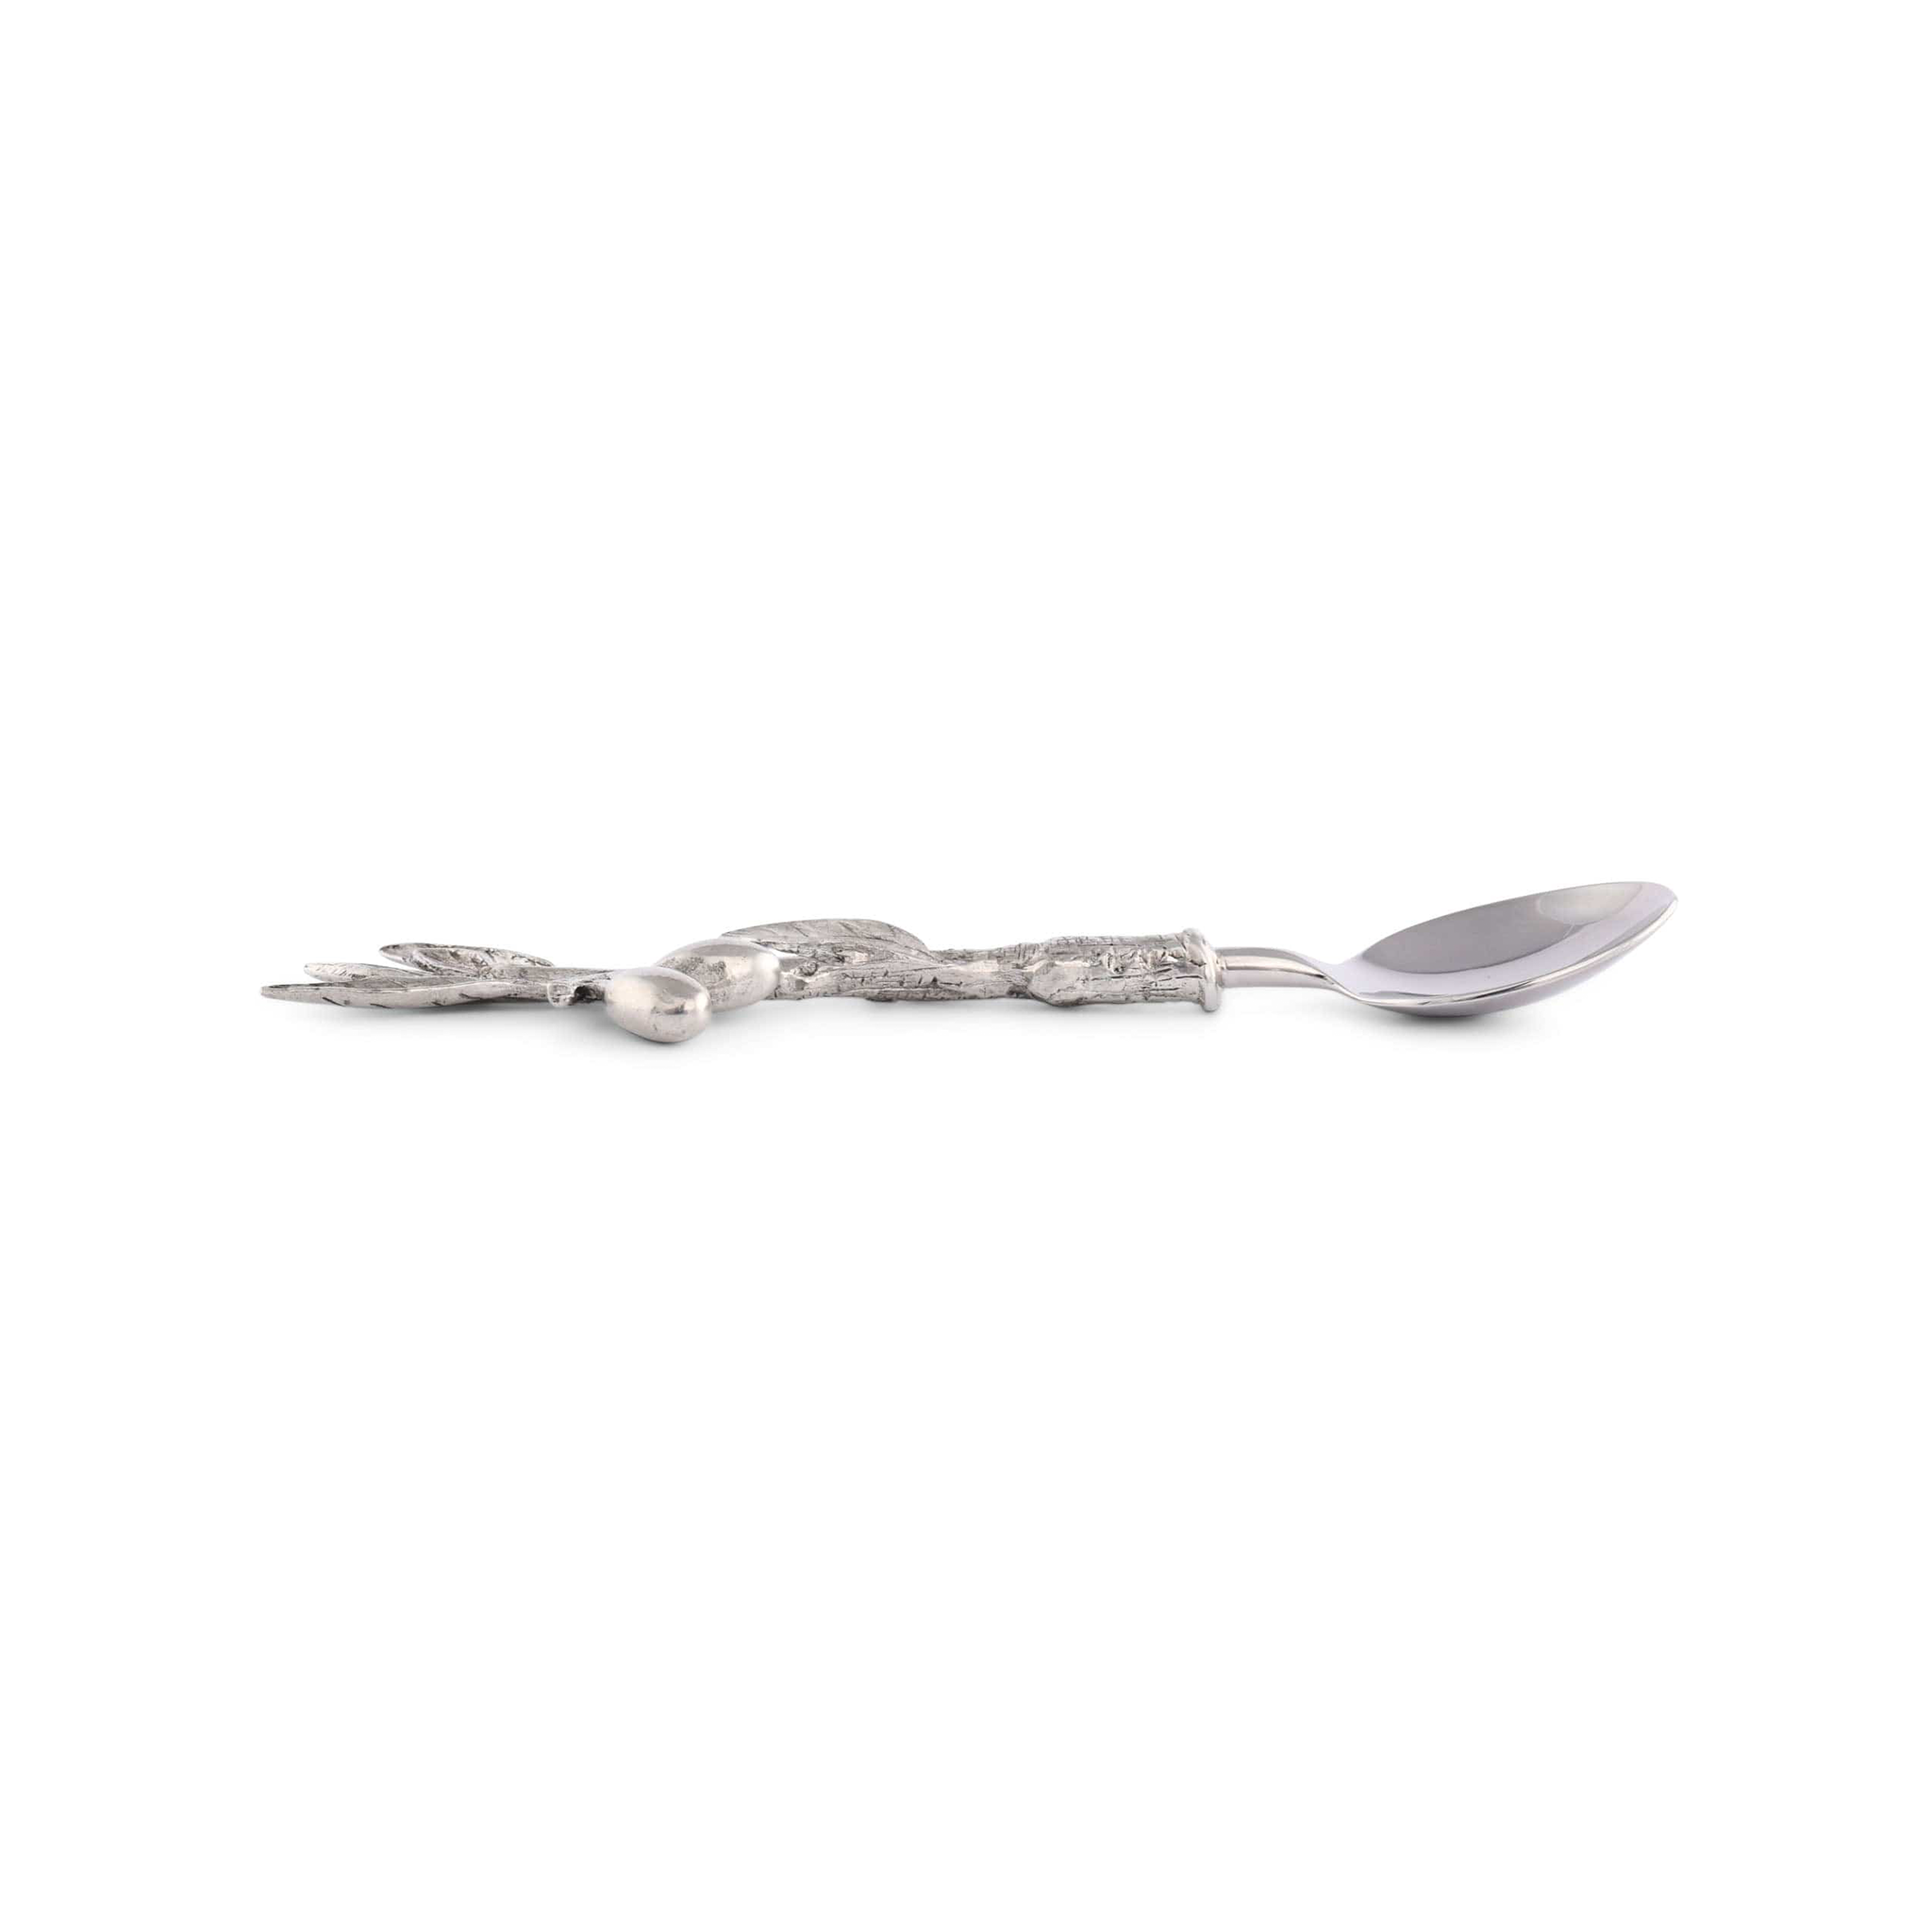 a spoon with olive branch design resting on a white surface